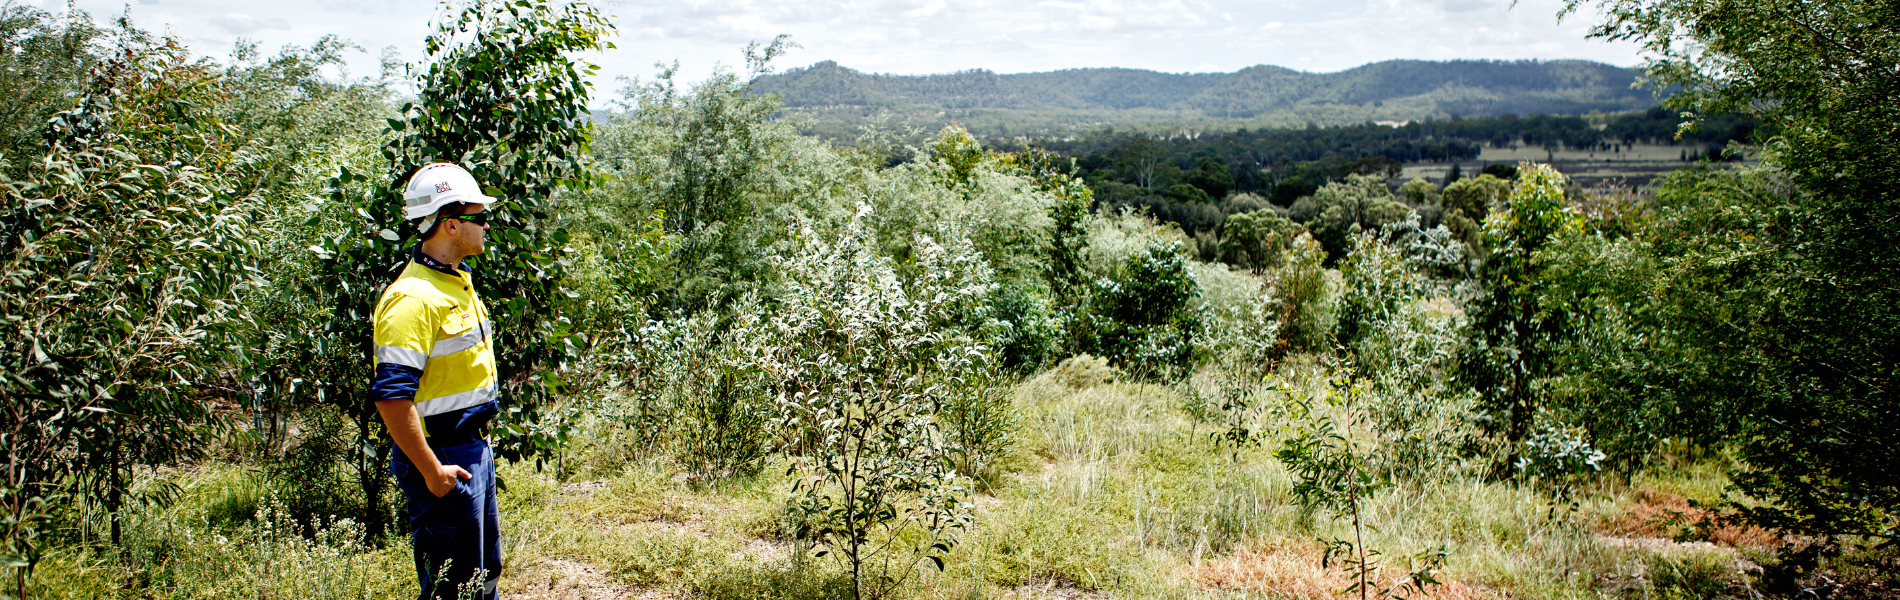 Rehabilitation Case Study: Native seed reclaiming on mined land (Yancoal MTW and HVO sites)